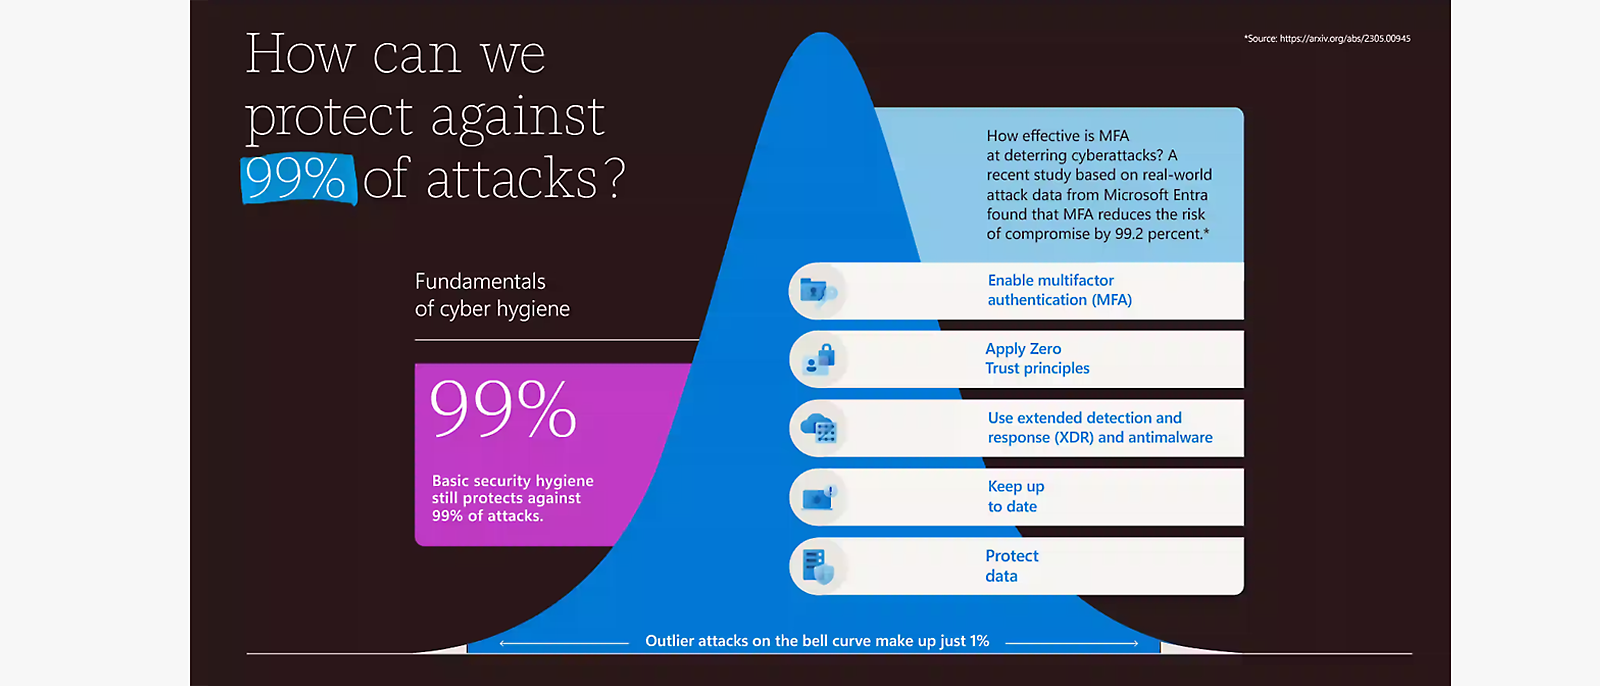 How can we protect against 99% of attacks? Basic security hygiene still protects against 99% of attacks. Enable multifactor authentication (MFA), apply Zero Trust principles, Use extended detection and response and antimalware, keep up to date, and protect data. Outlier attacks make up just 1%. How effective is MFA at deterring cyberattacks? A recent study based on real-world attack data from Microsoft Entra found that MFA reduces the risk of compromise by 99.2 percent